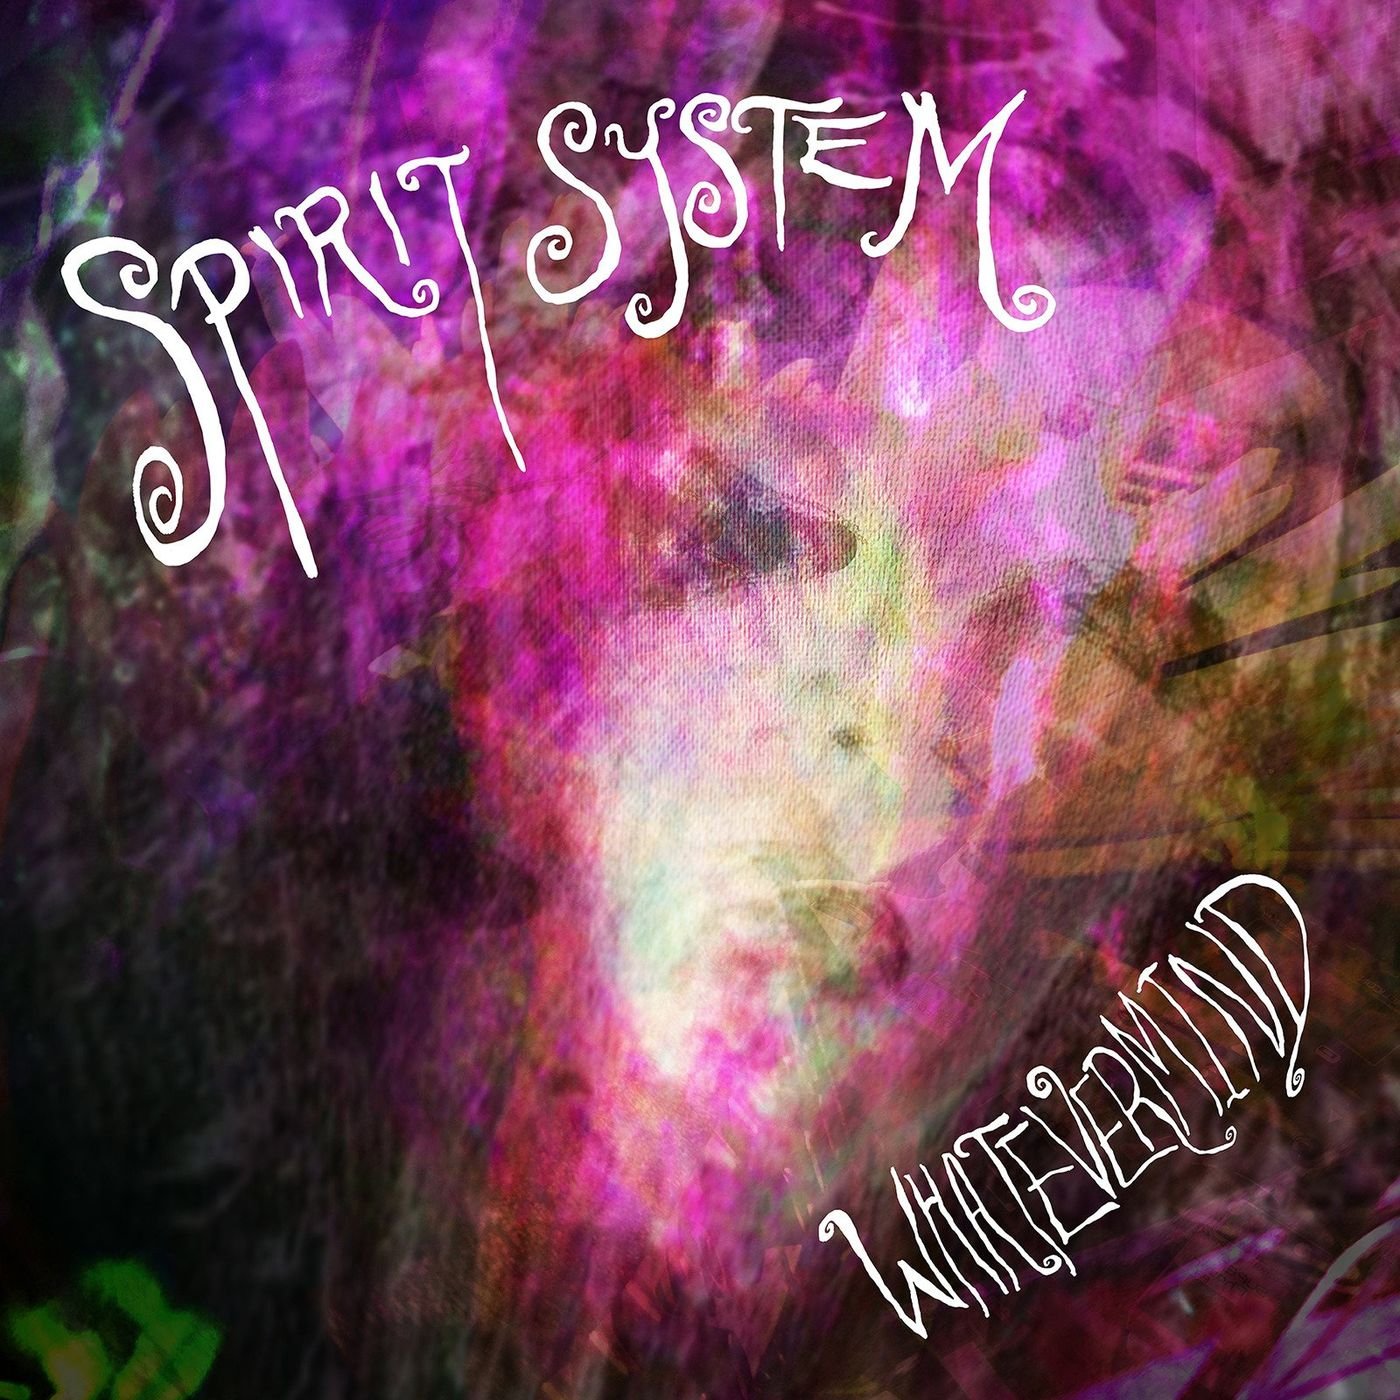 Spirit System - Whatevermind (2021) FLAC Download